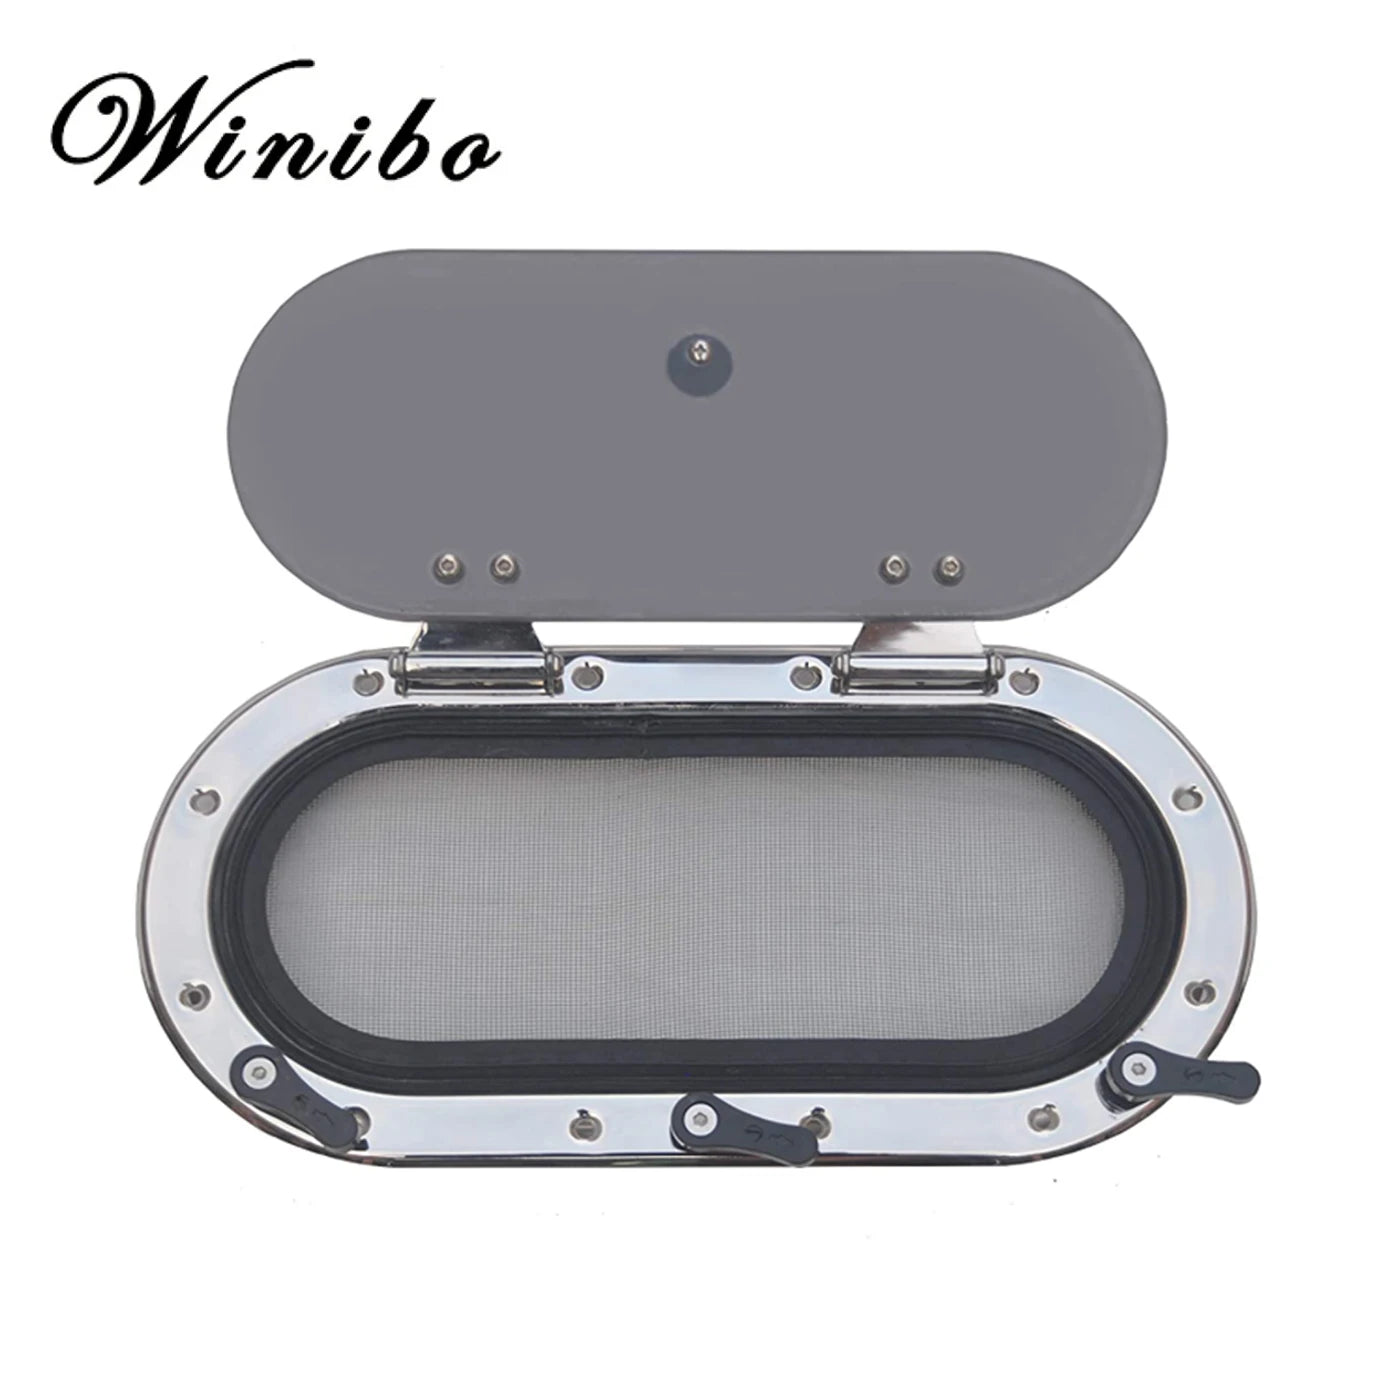 Marine Stainless Steel Oval Porthole with Mosquito Screen - Opening Window Hatch for Boat and Yacht